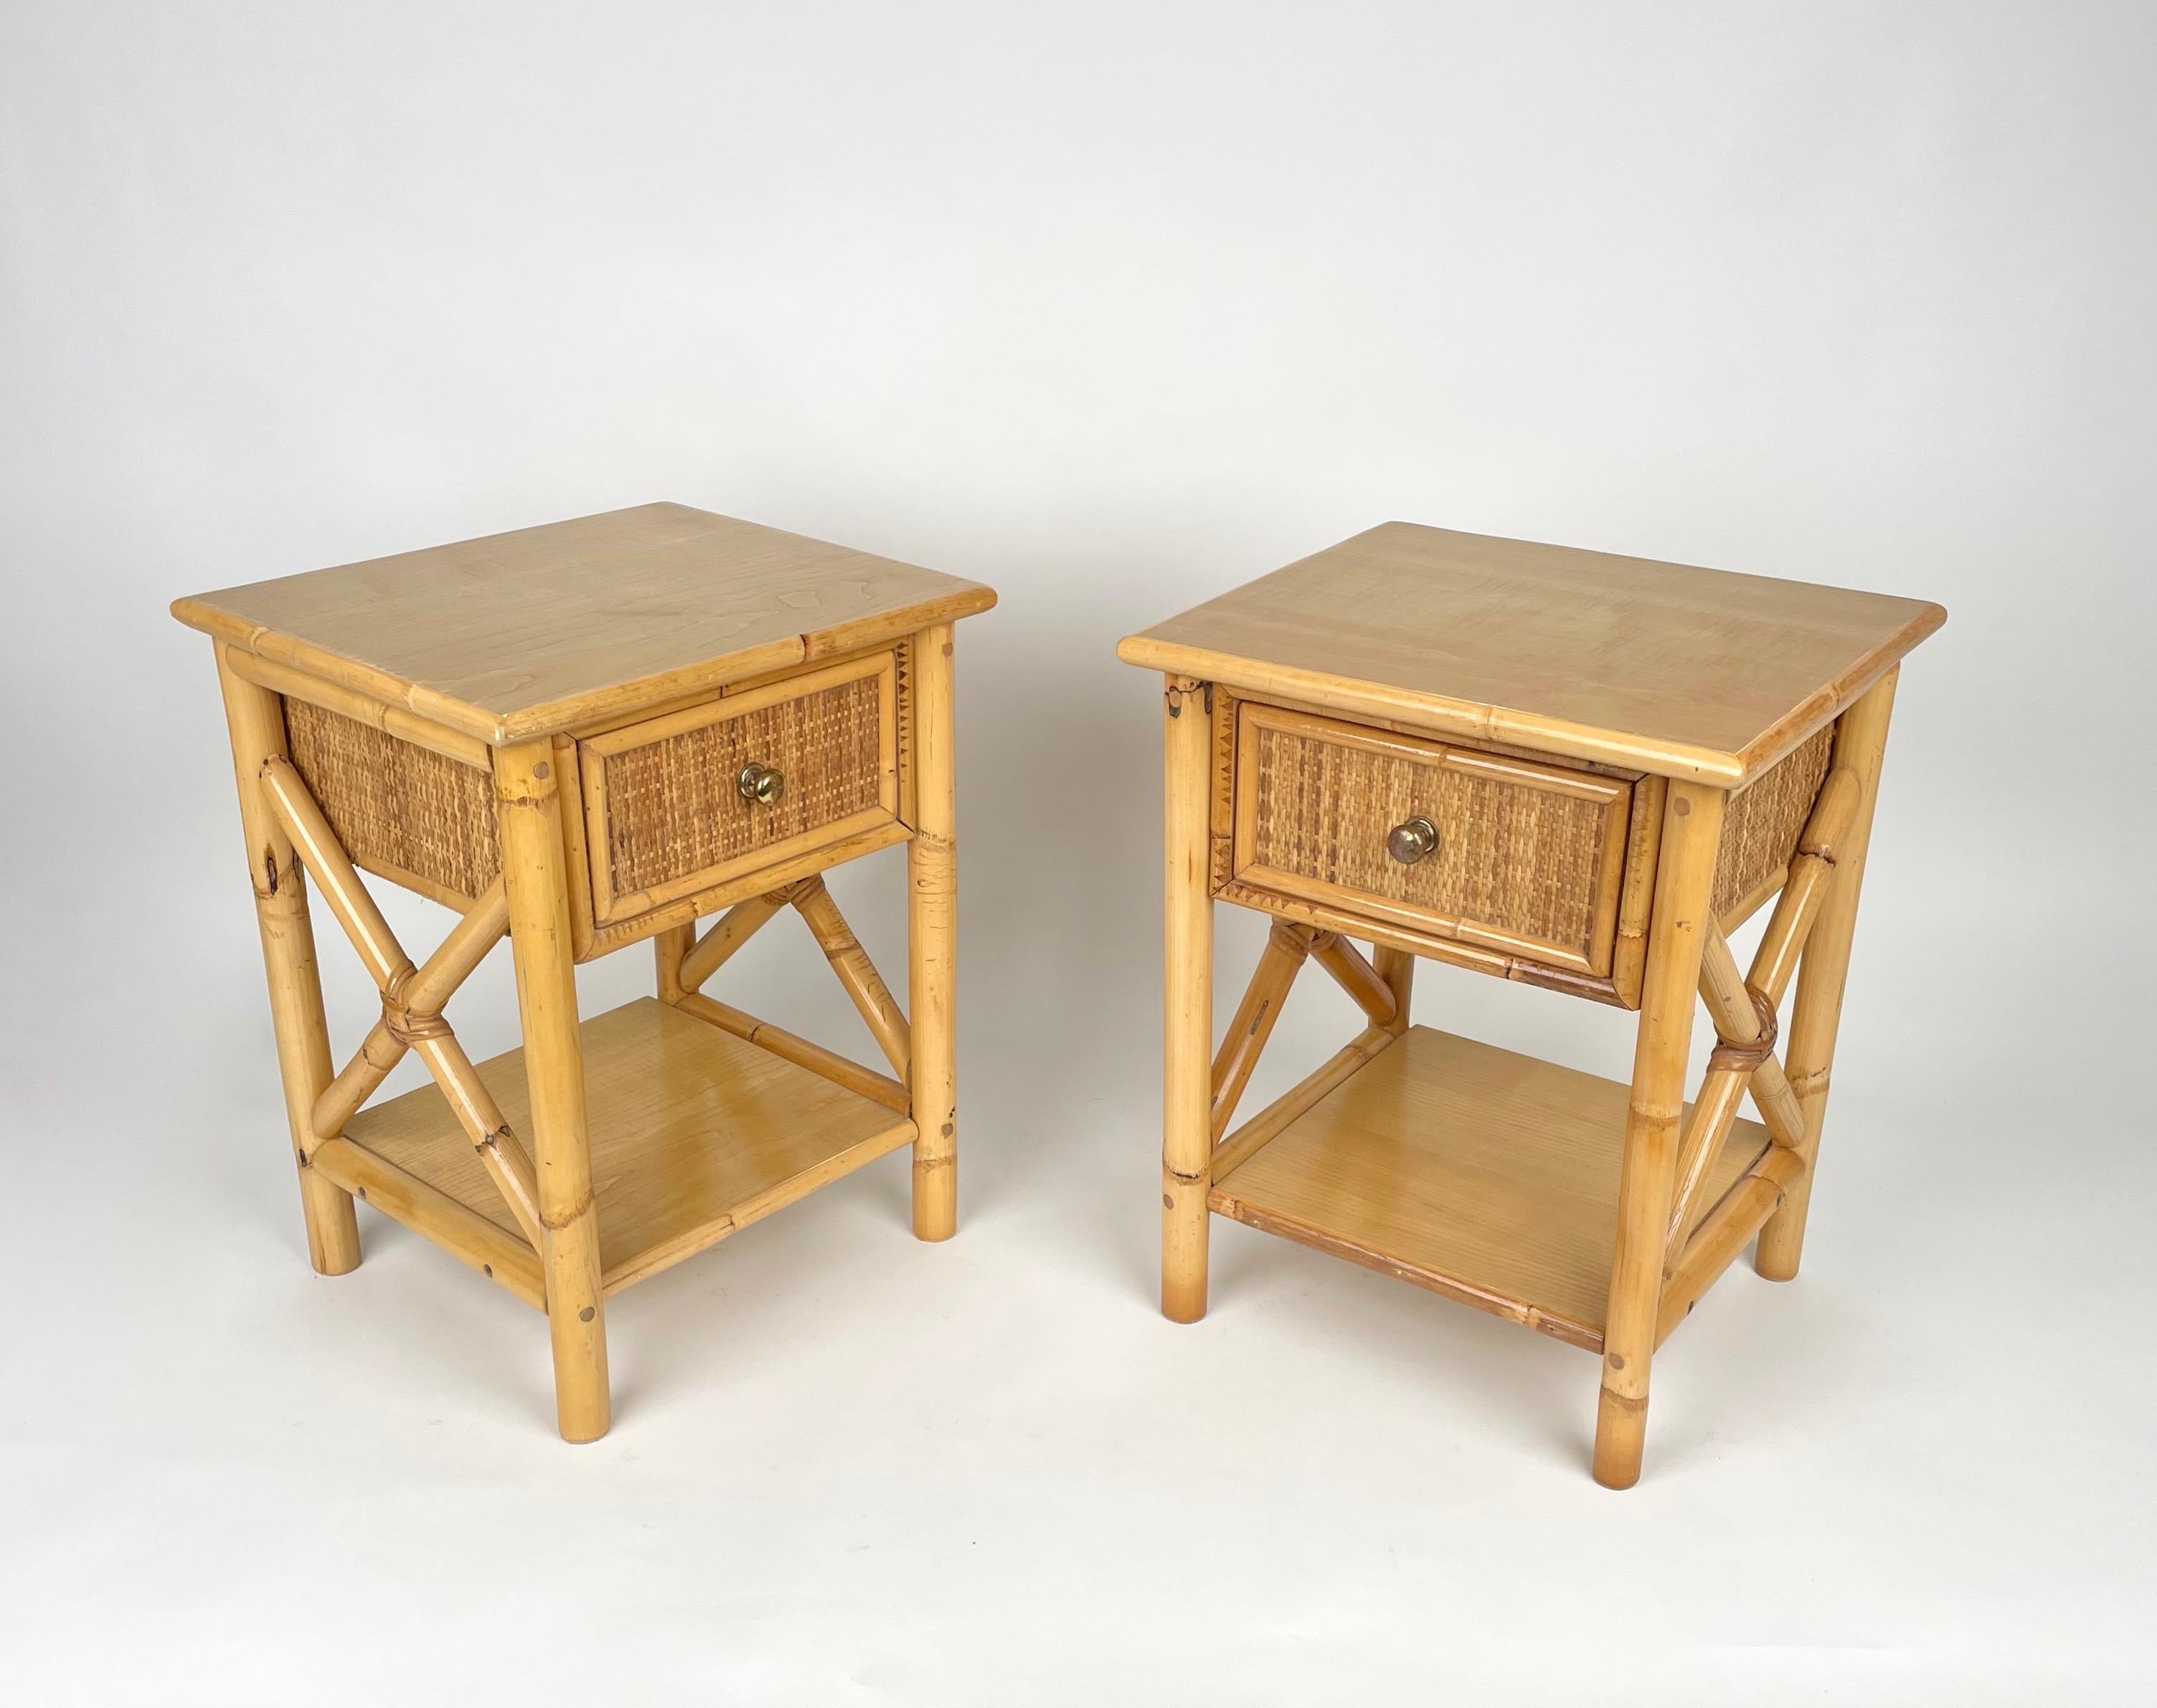 Pair of bed side table nightstands in bamboo and rattan with drawer featuring a brass handle and bottom shelf in wood.

Made in Italy in the 1980s.